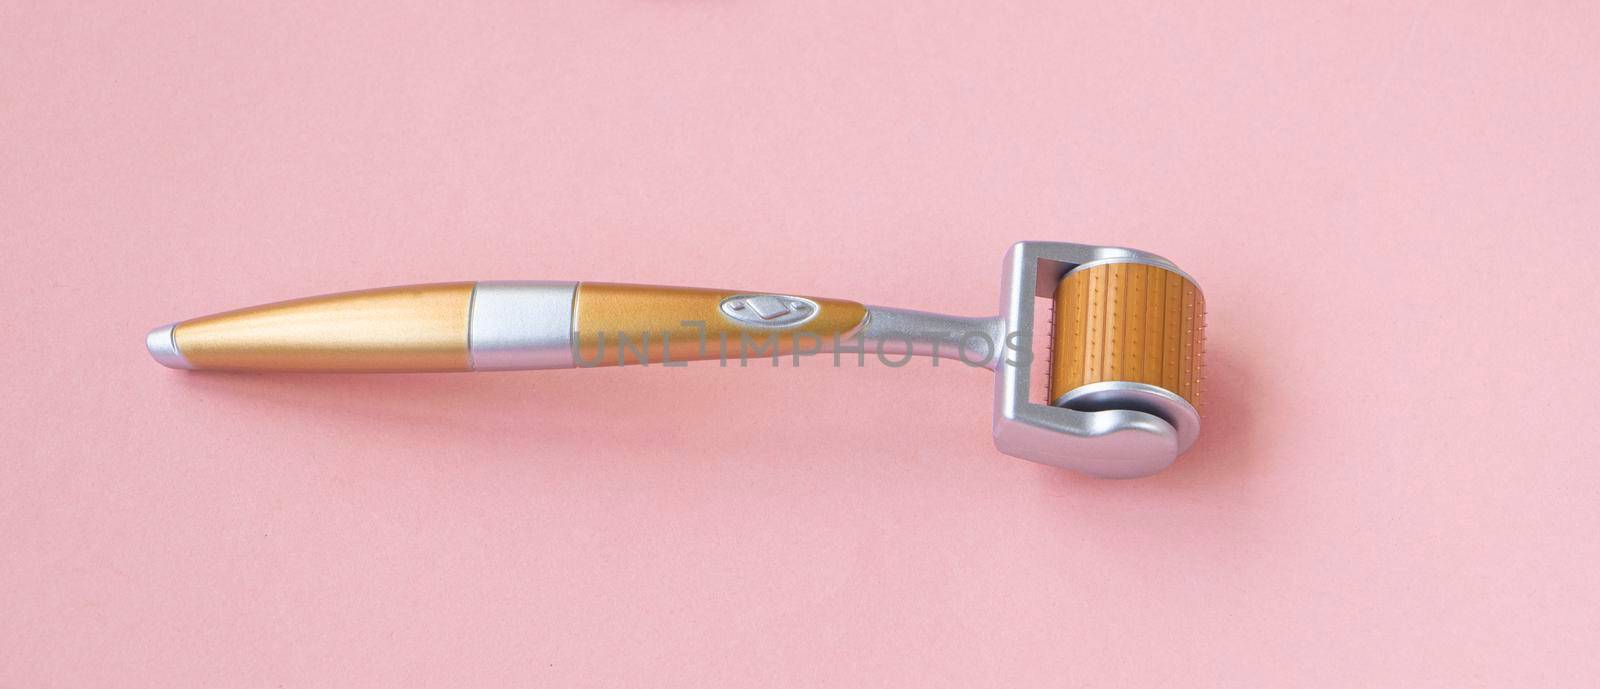 Mezoroller, dermaroller, mesotherapy skin tool. pink background. Roller set with microscopic needles. Stimulate collage. beauty pain concept.n production. High quality photo